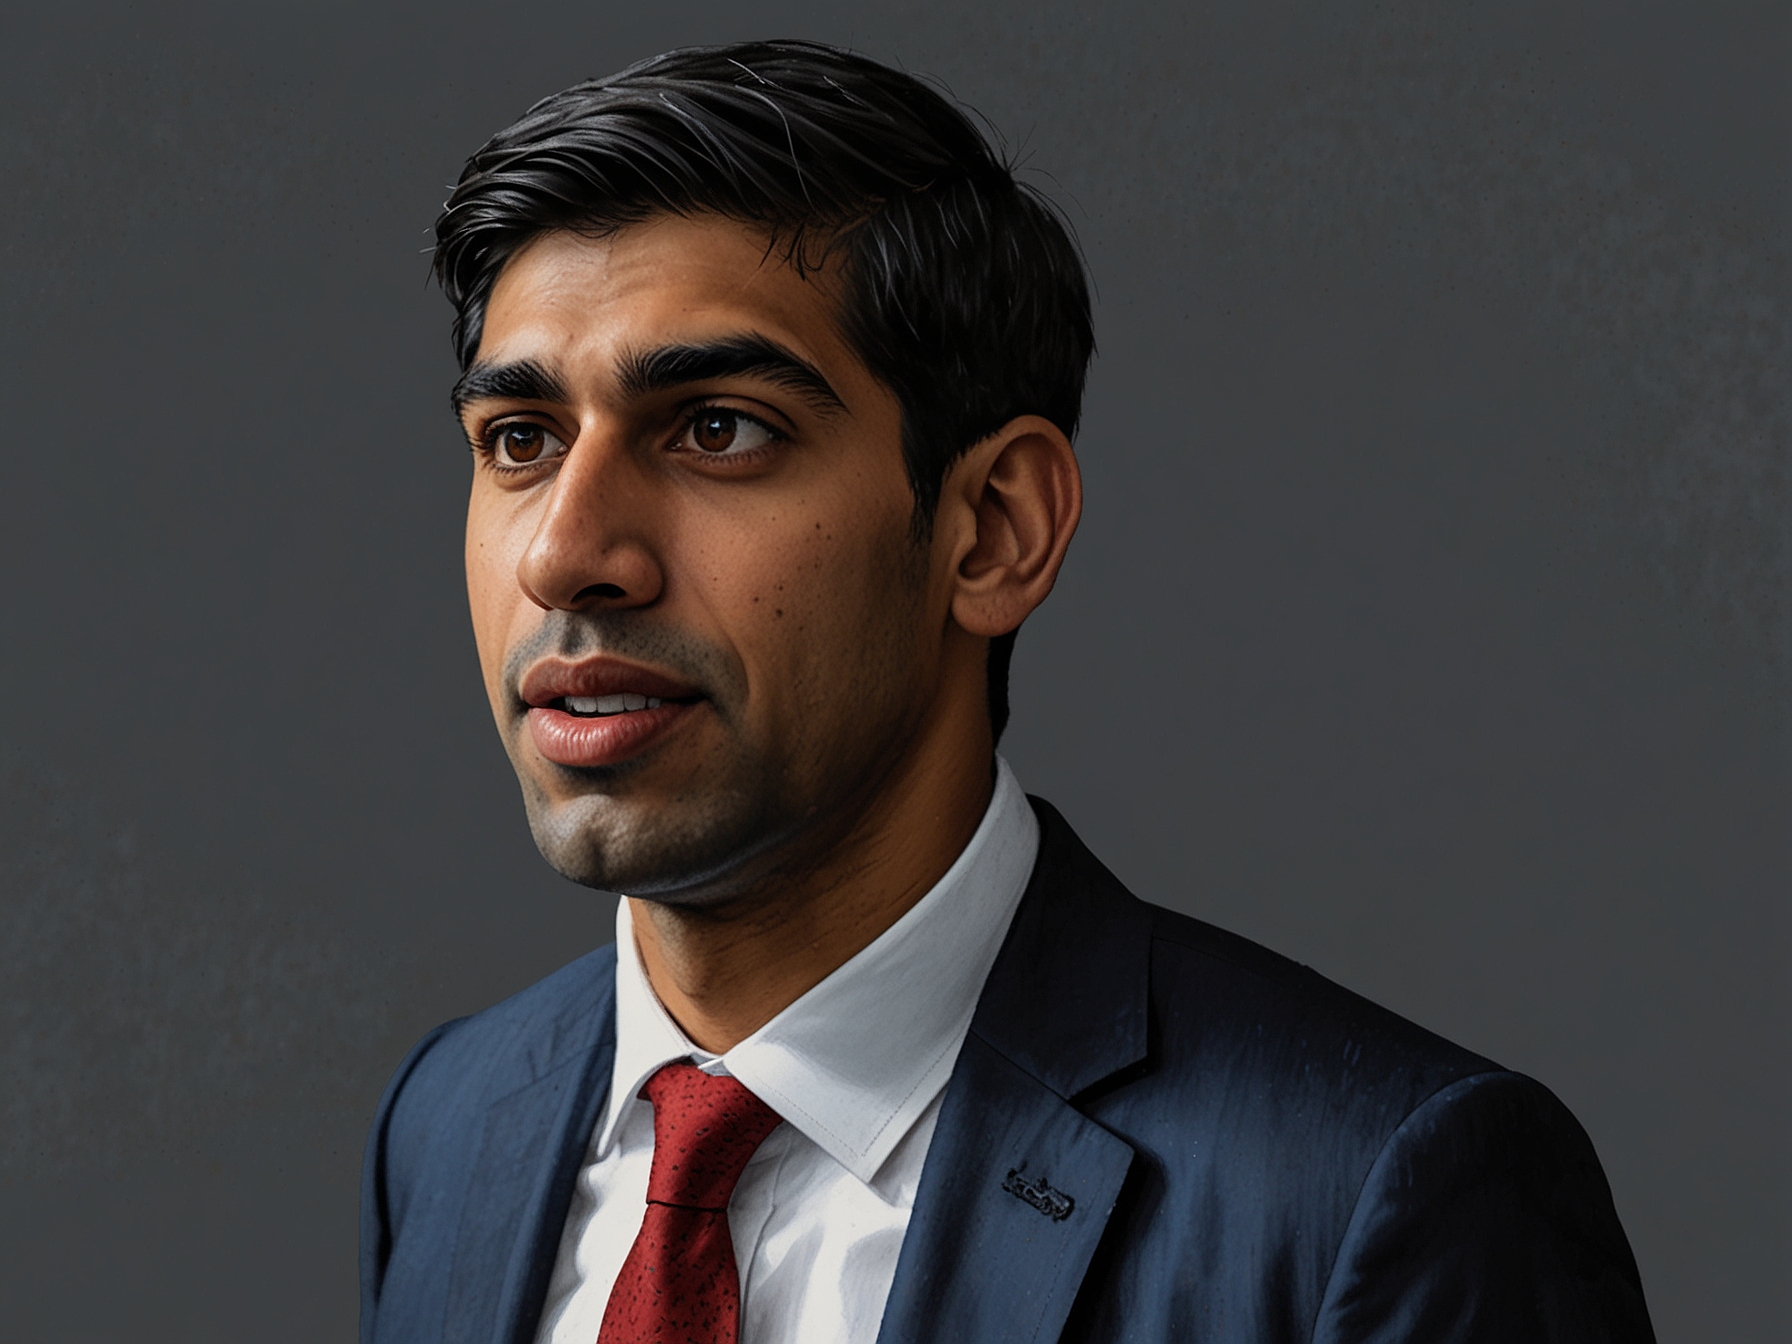 Rishi Sunak during the live TV interview, addressing the allegations of election betting by Tory candidates. His firm stance highlights the seriousness of the situation and his call for legal action.